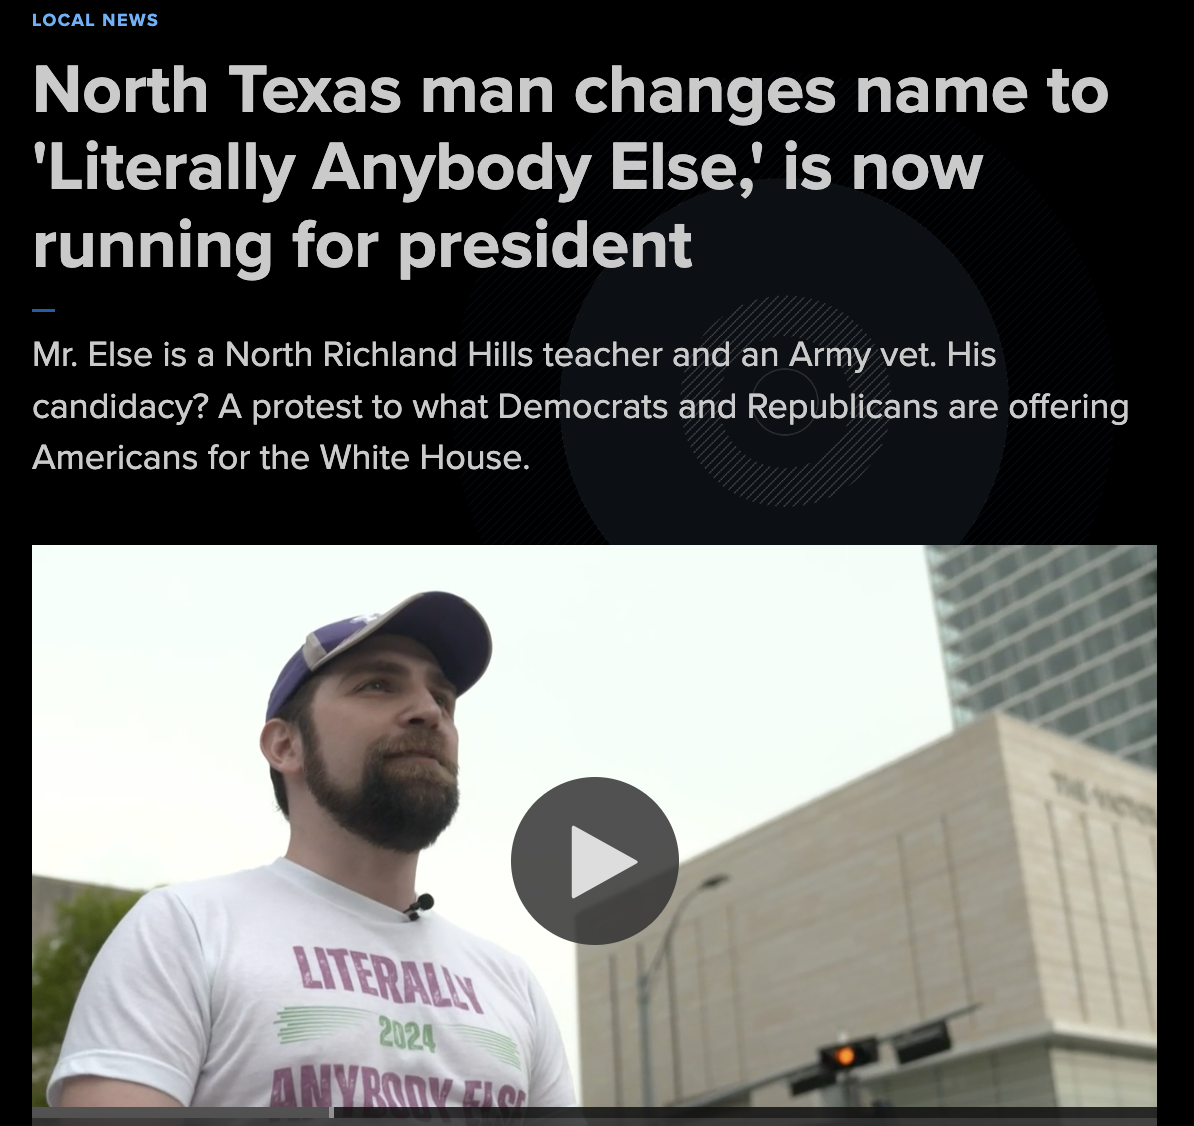 photo caption - Local News North Texas man changes name to 'Literally Anybody Else,' is now running for president Mr. Else is a North Richland Hills teacher and an Army vet. His candidacy? A protest to what Democrats and Republicans are offering Americans